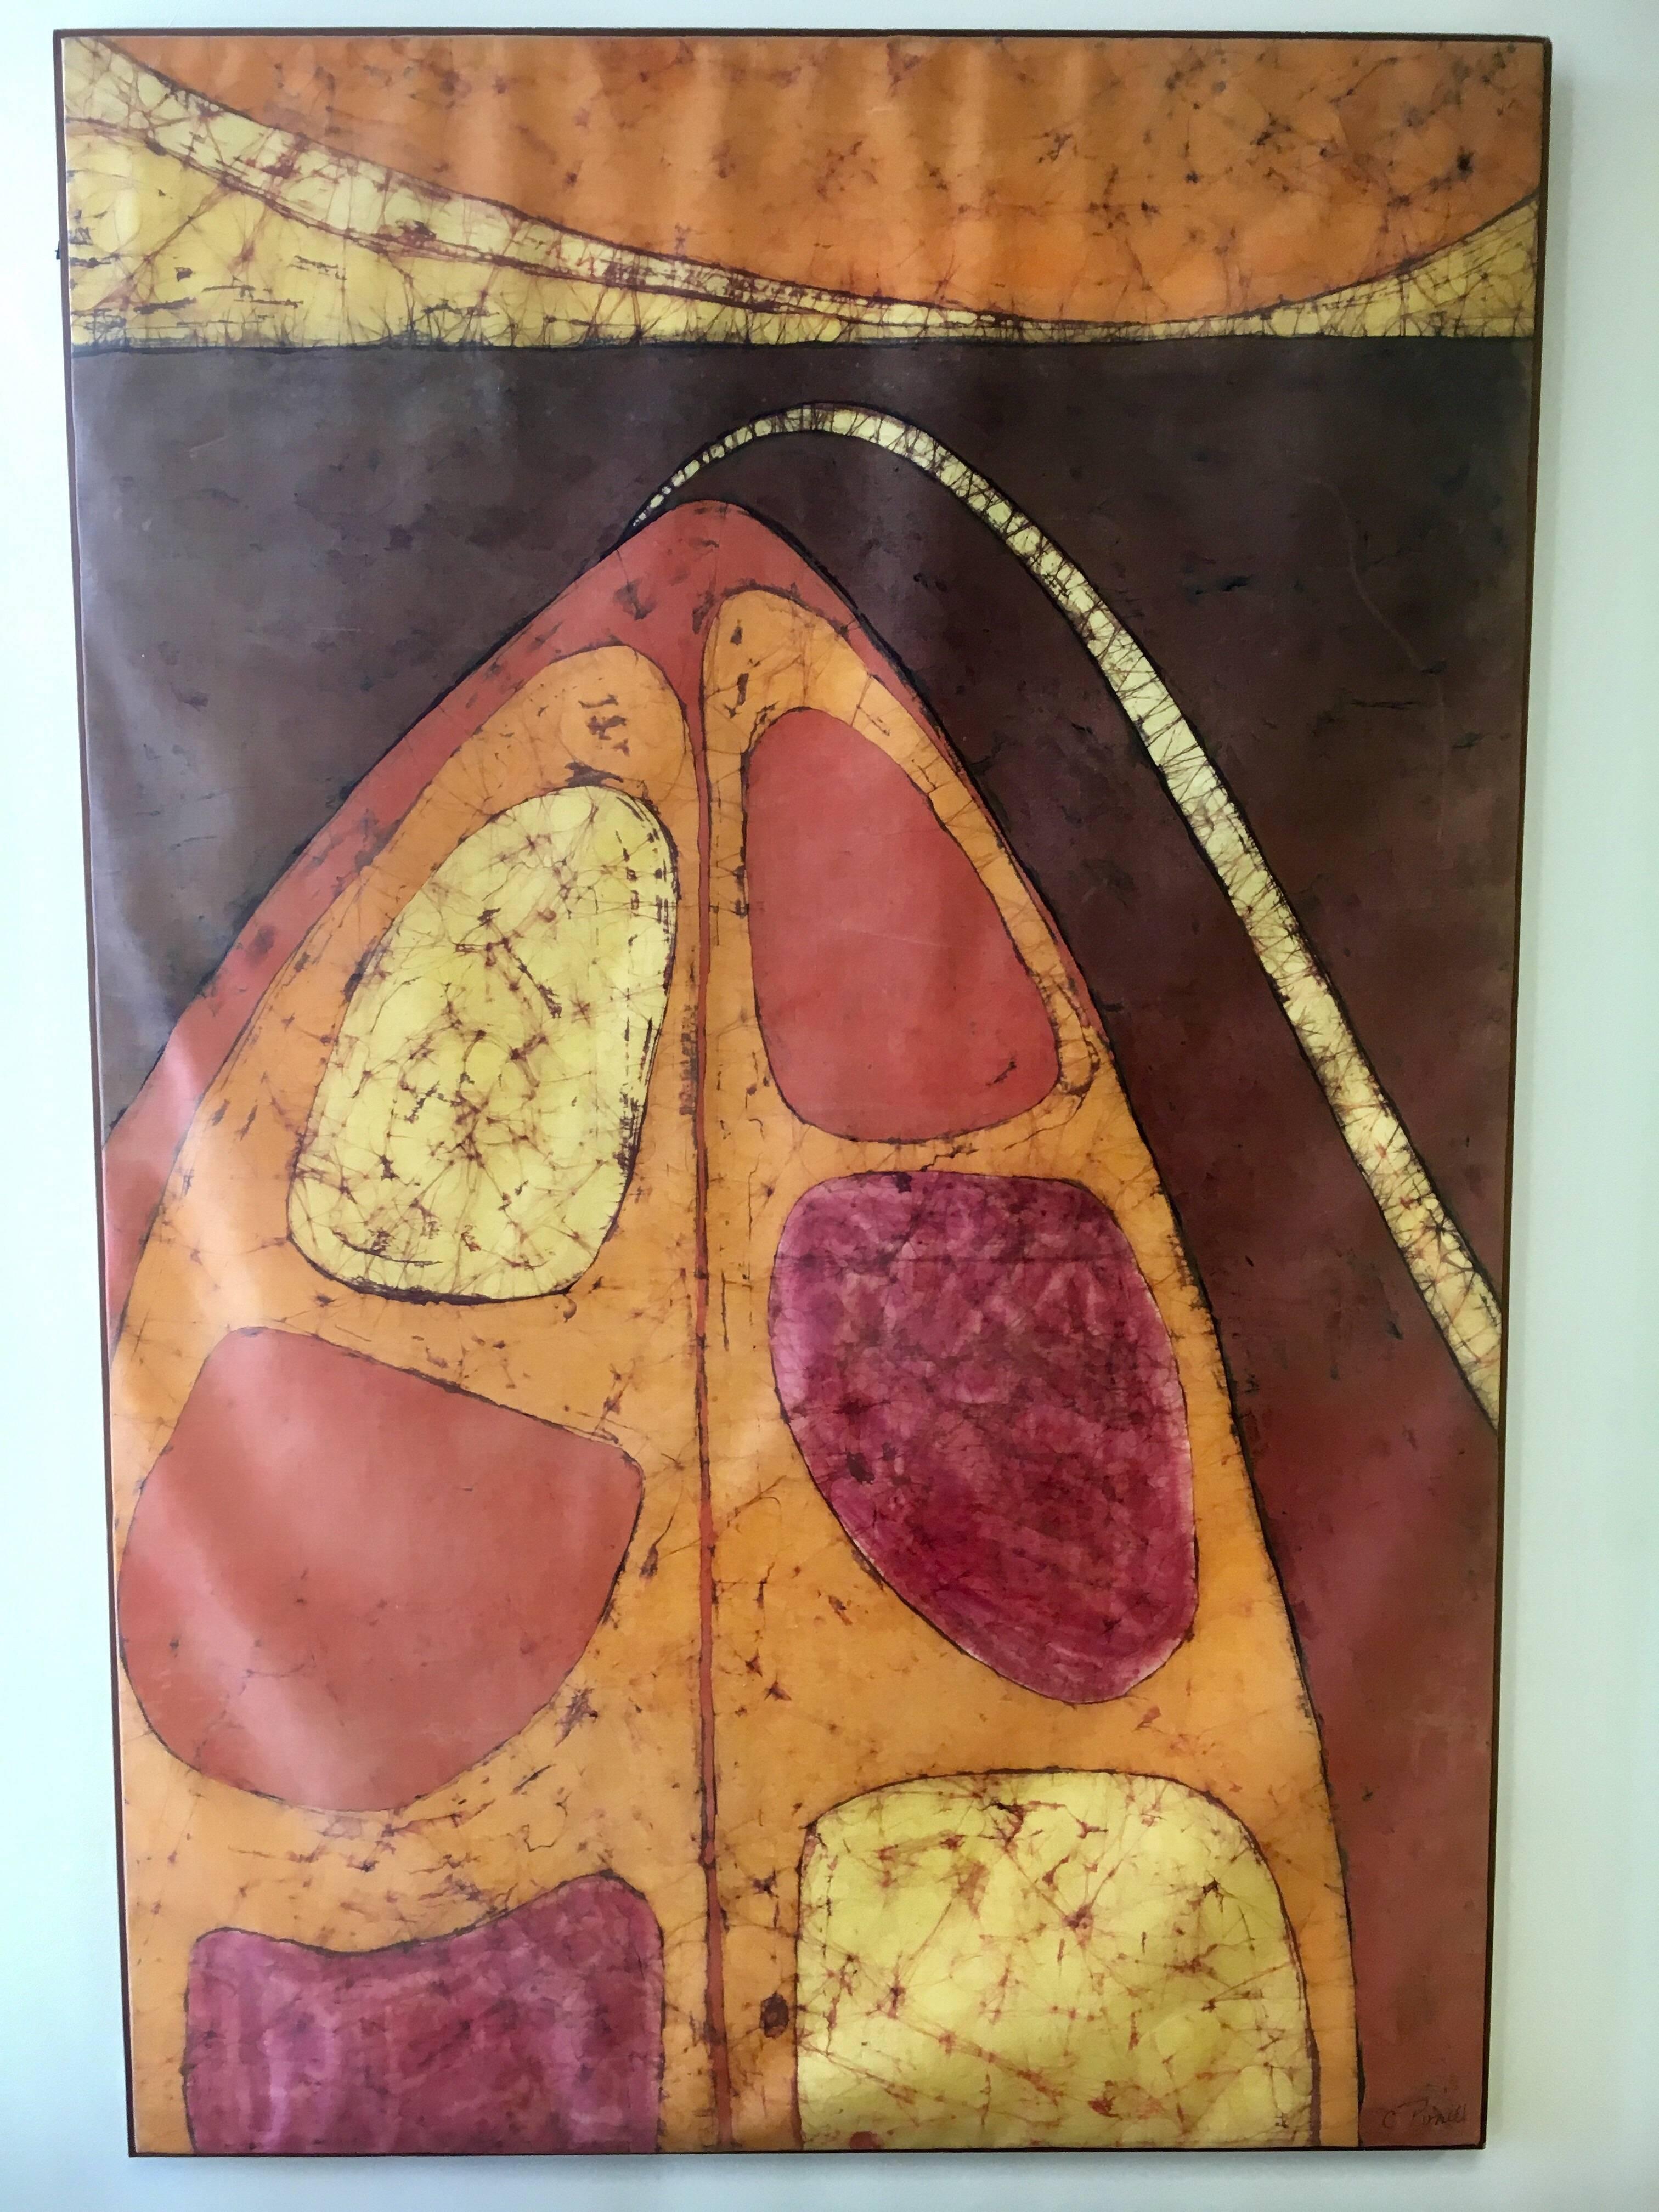 Vibrant original signed 1960s batik large painting signed by the artist in lower right by C. Powell. Framed and ready to hang. Unusual colors feature pink, gold, brown, orange and black.